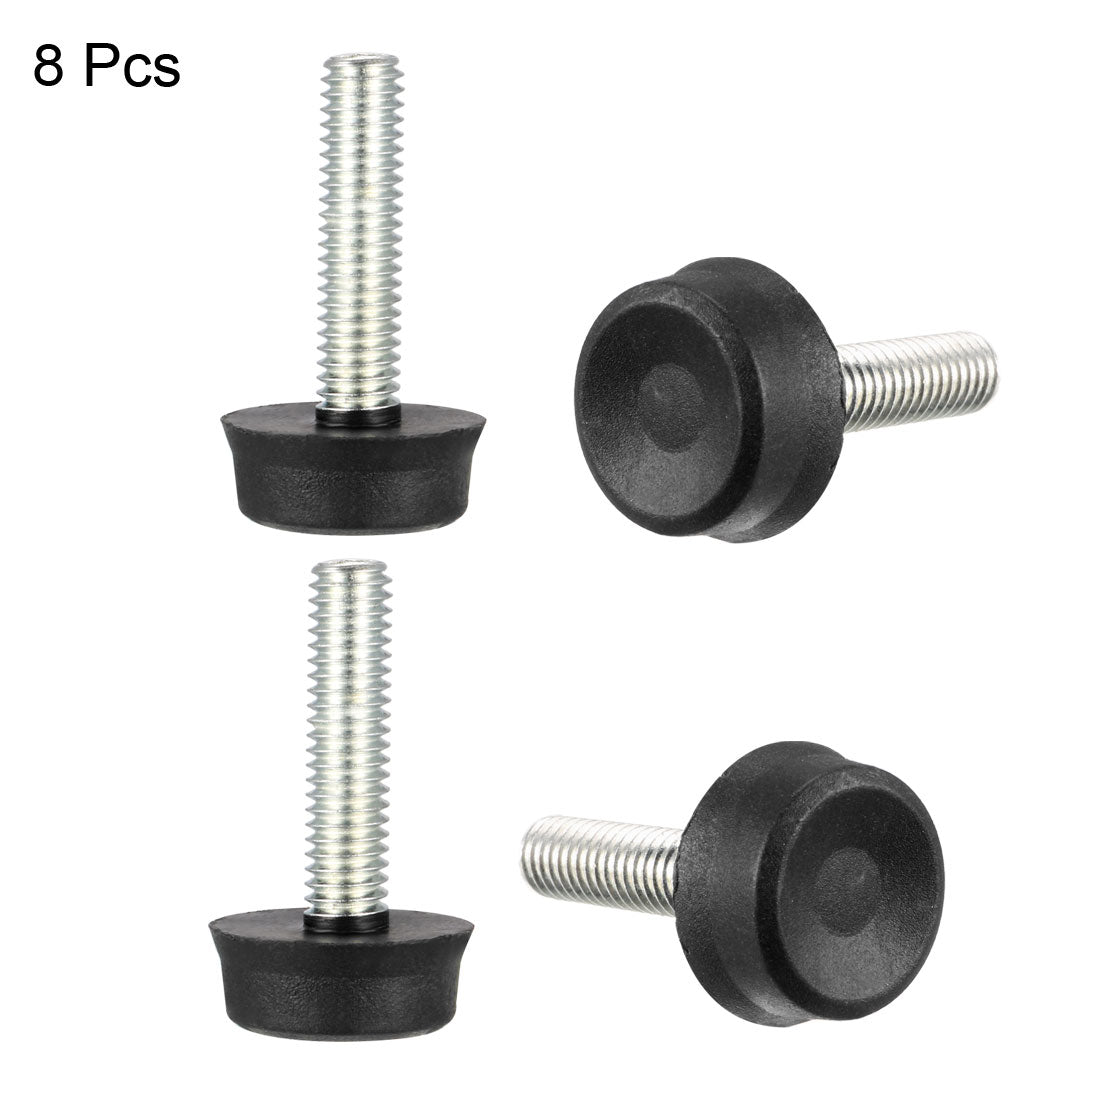 uxcell Uxcell Furniture Levelers, 7mm to 21mm Adjustable Height M6 x 25mm Threaded, 8Pcs